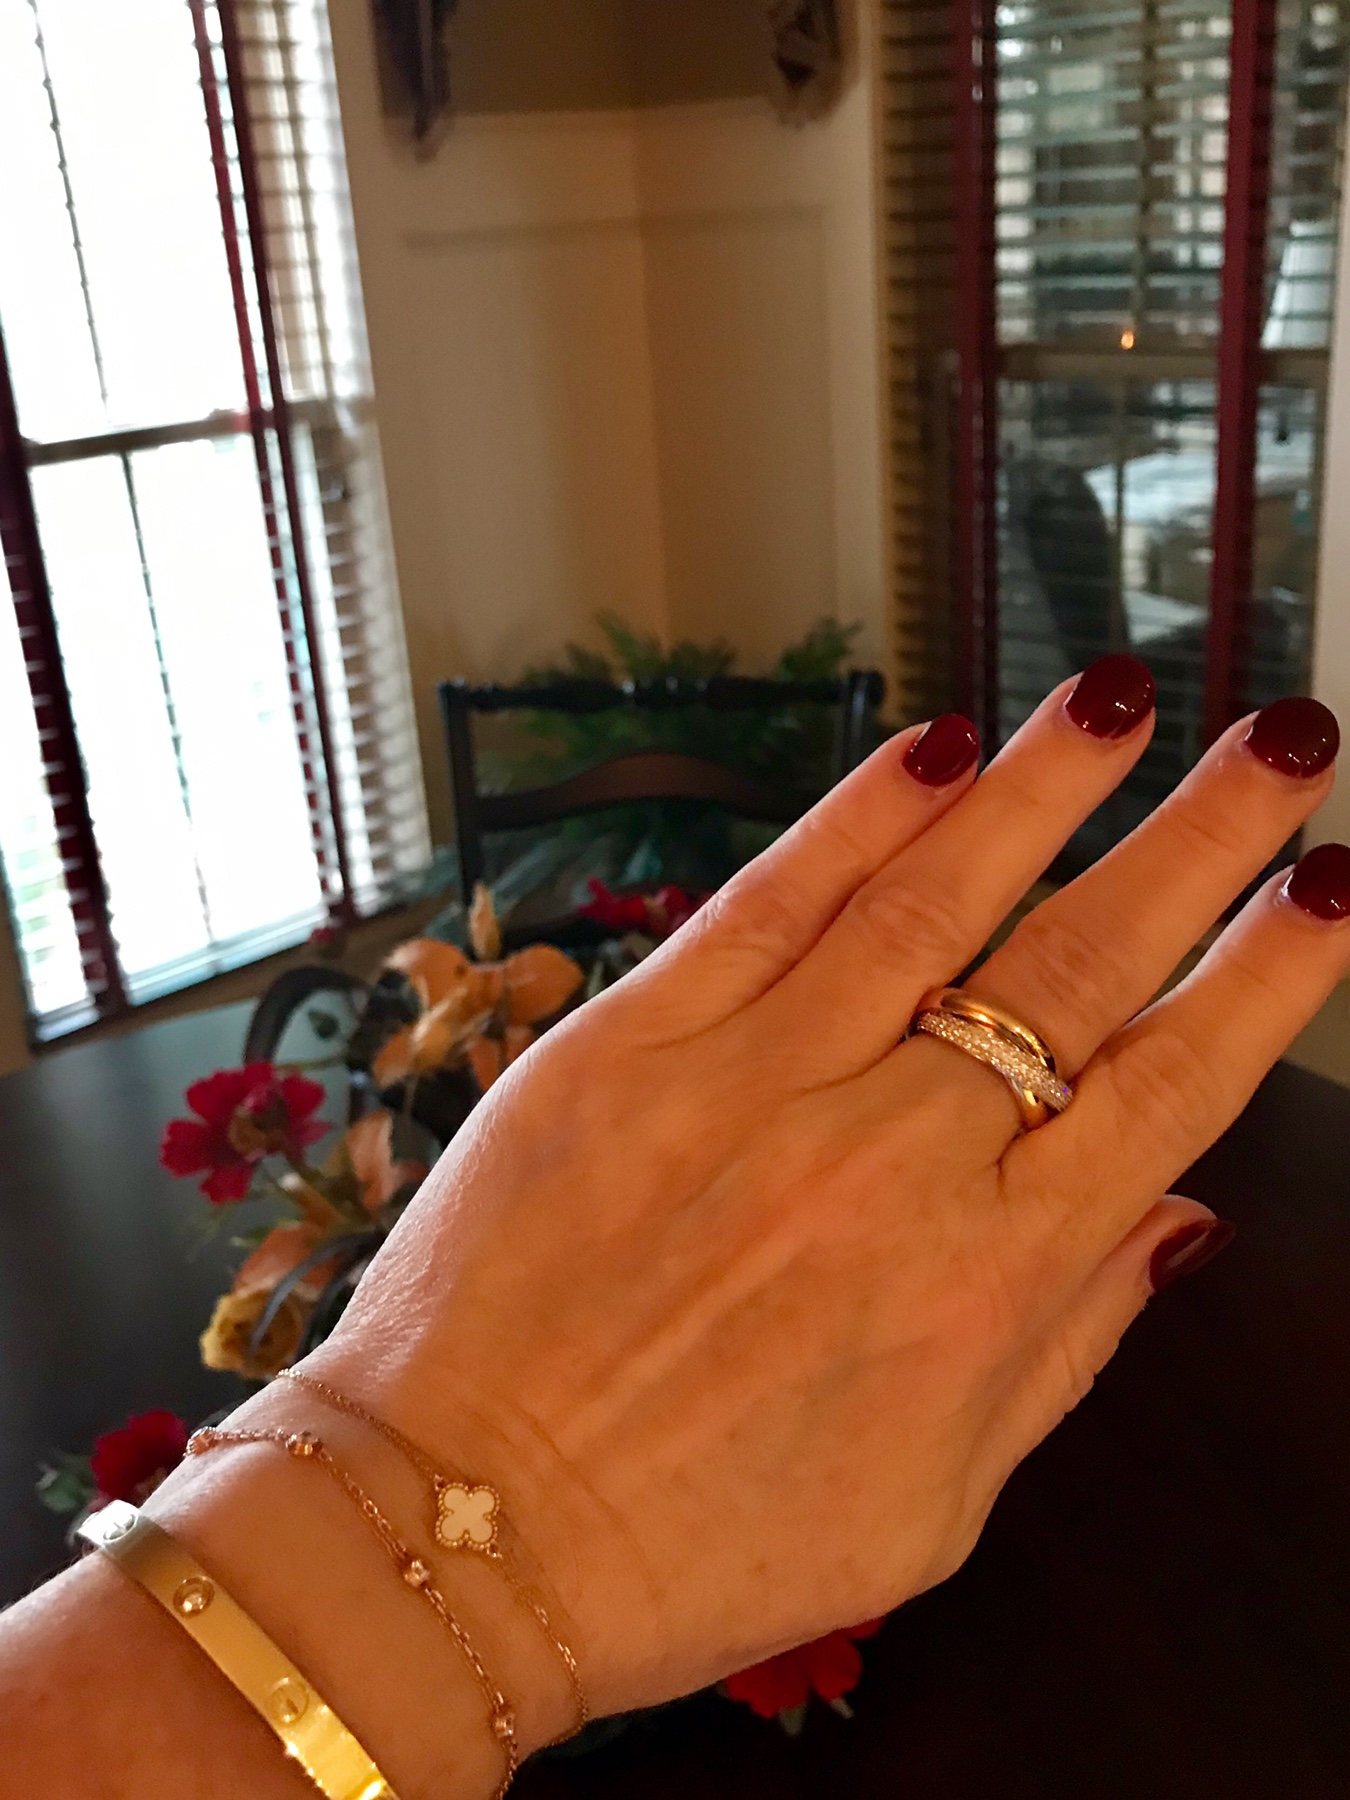 How do you wear your Cartier trinity ring? | Page 2 | PurseForum